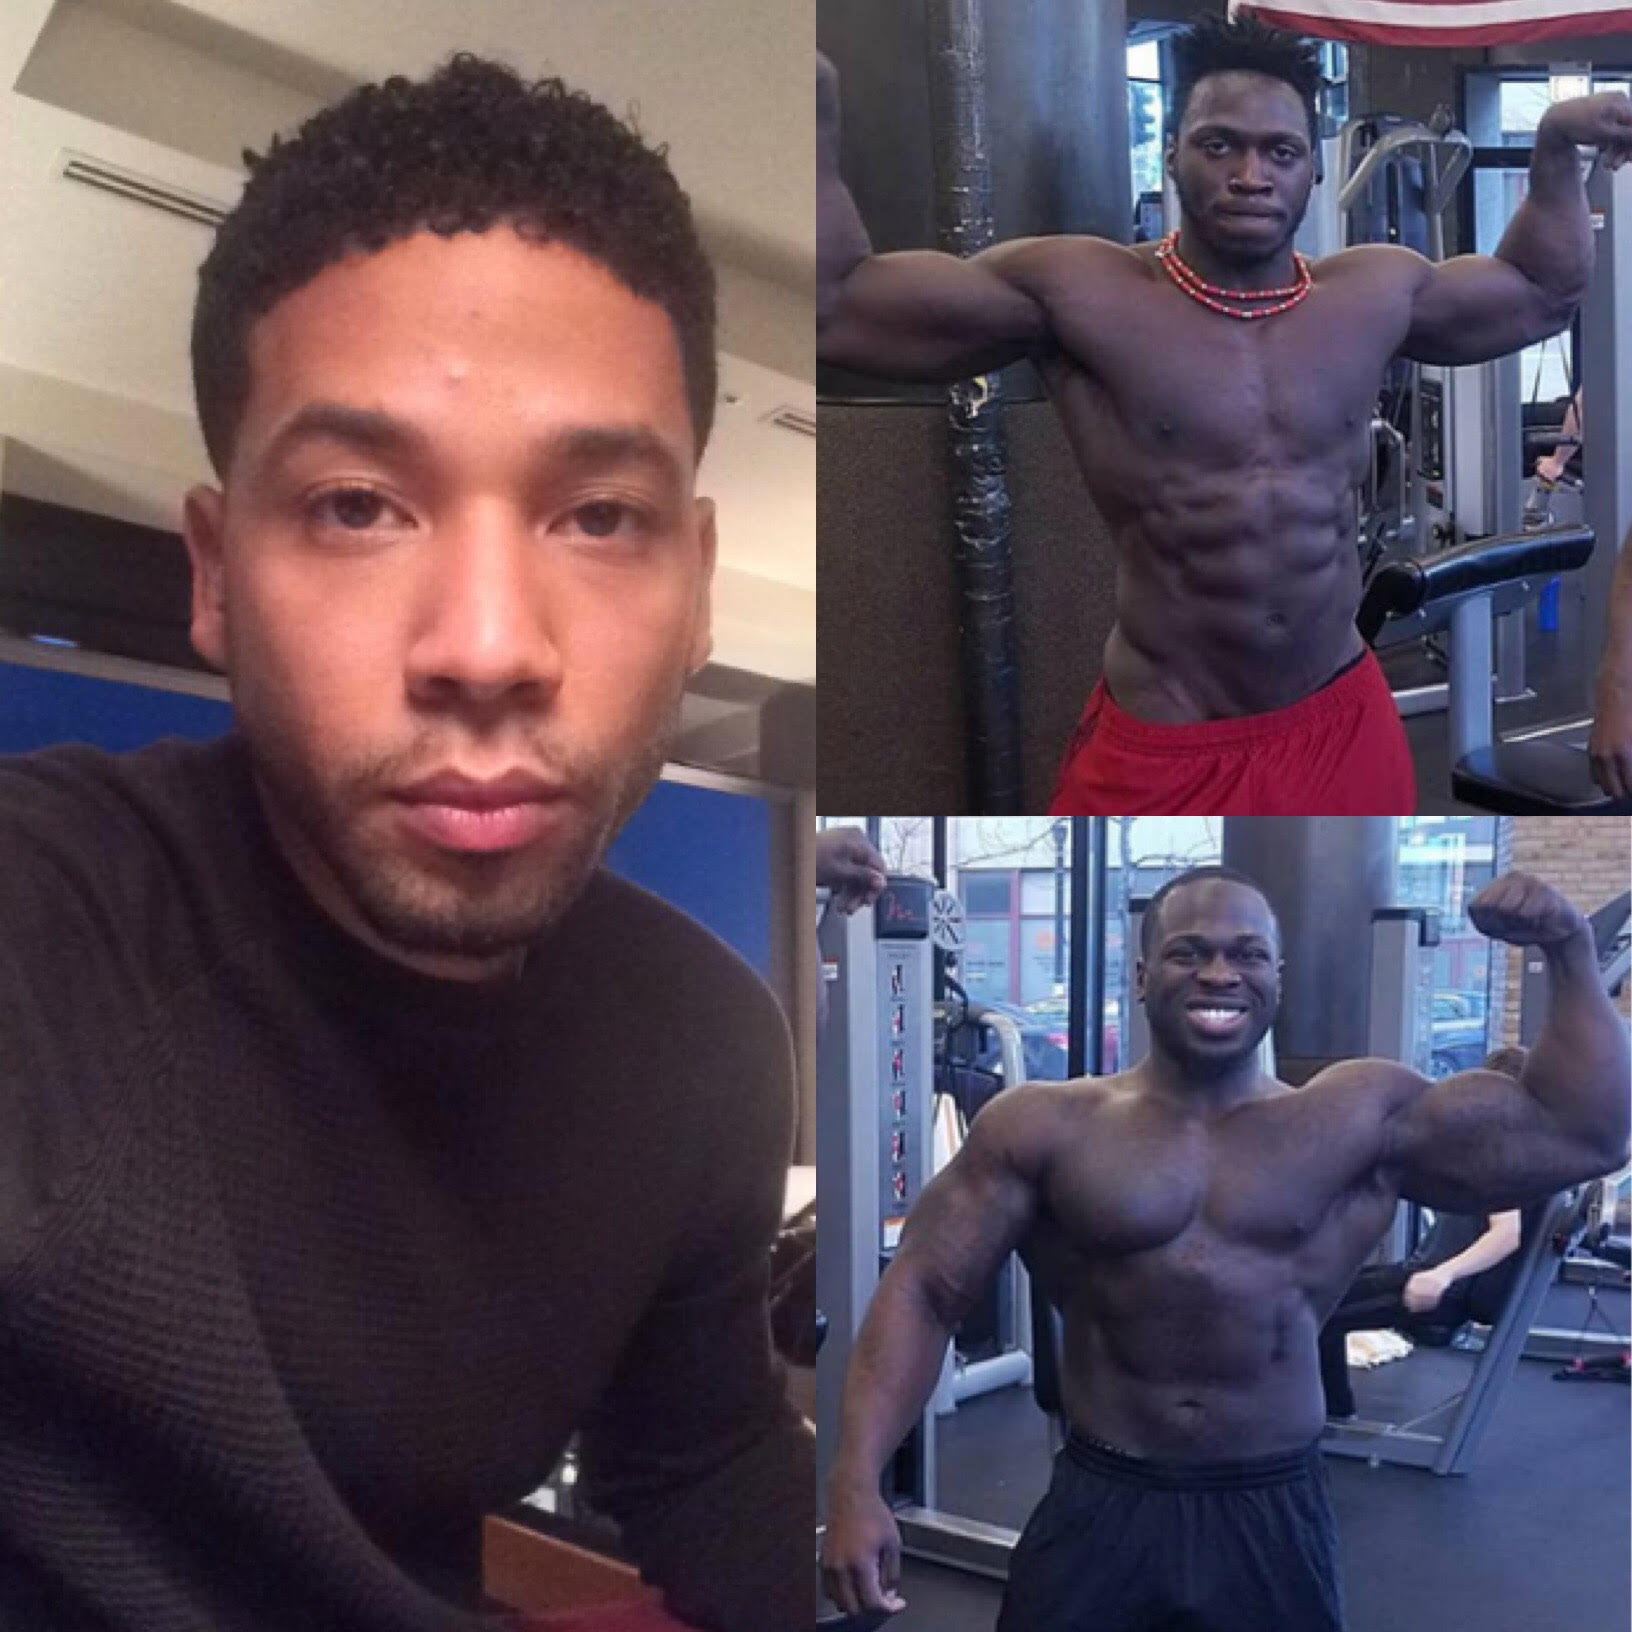 Jussie Smollett - Nigerian Brothers Claim They Rehearsed Attack With Empire Star ...1632 x 1632